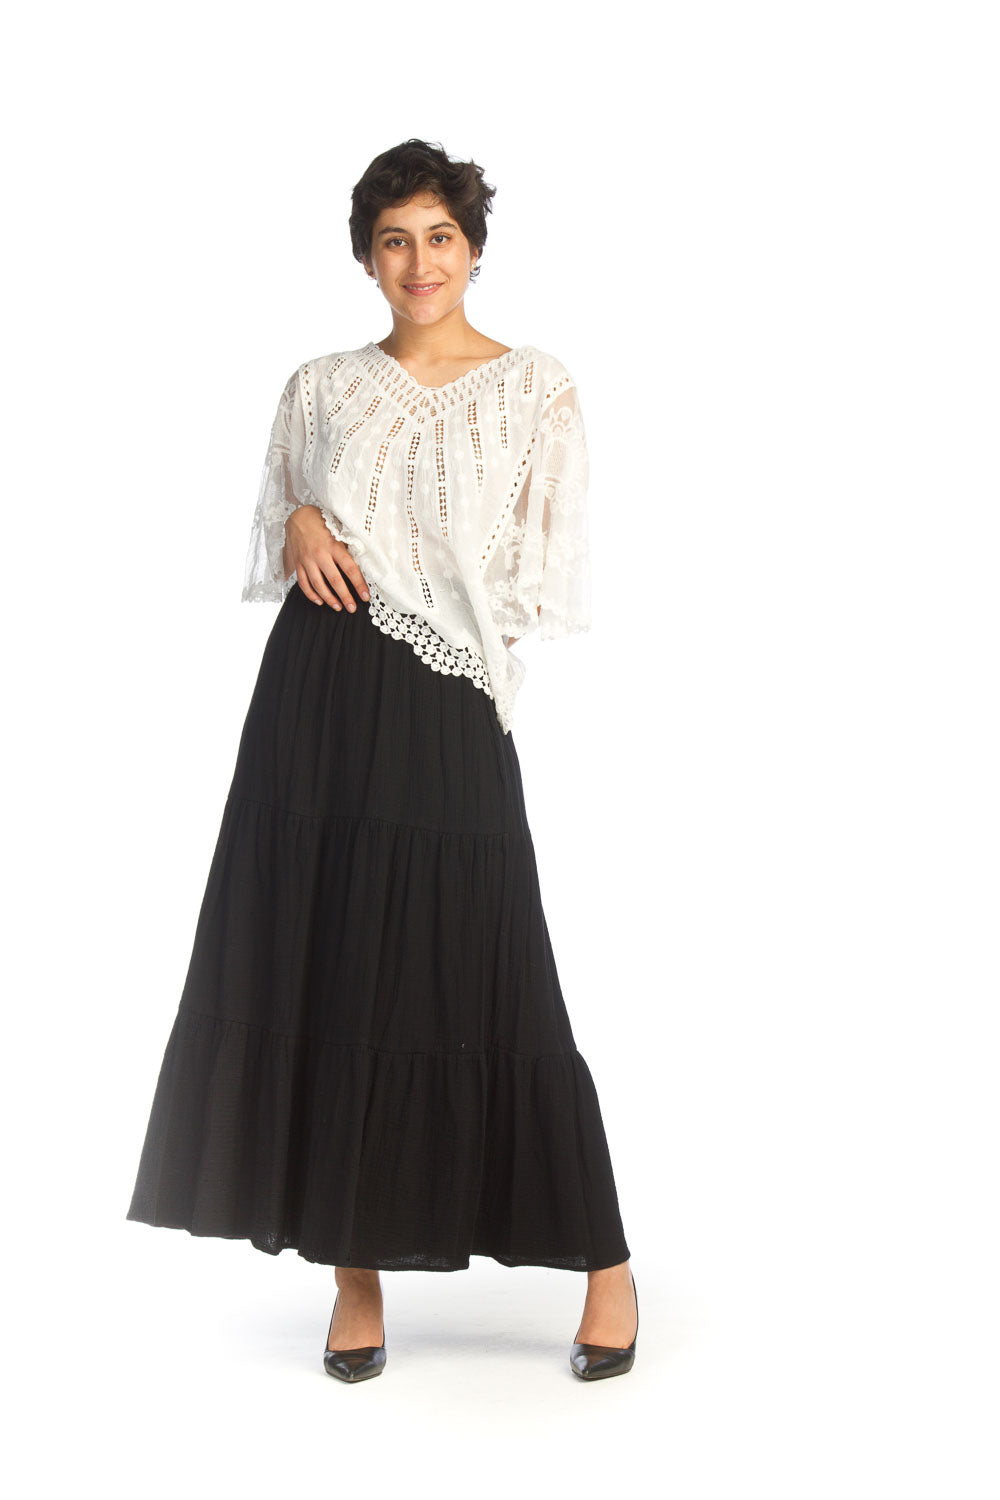 PS-14912 - Black - COTTON GAUZE TIERED SKIRT WITH ELASTIC WAIST